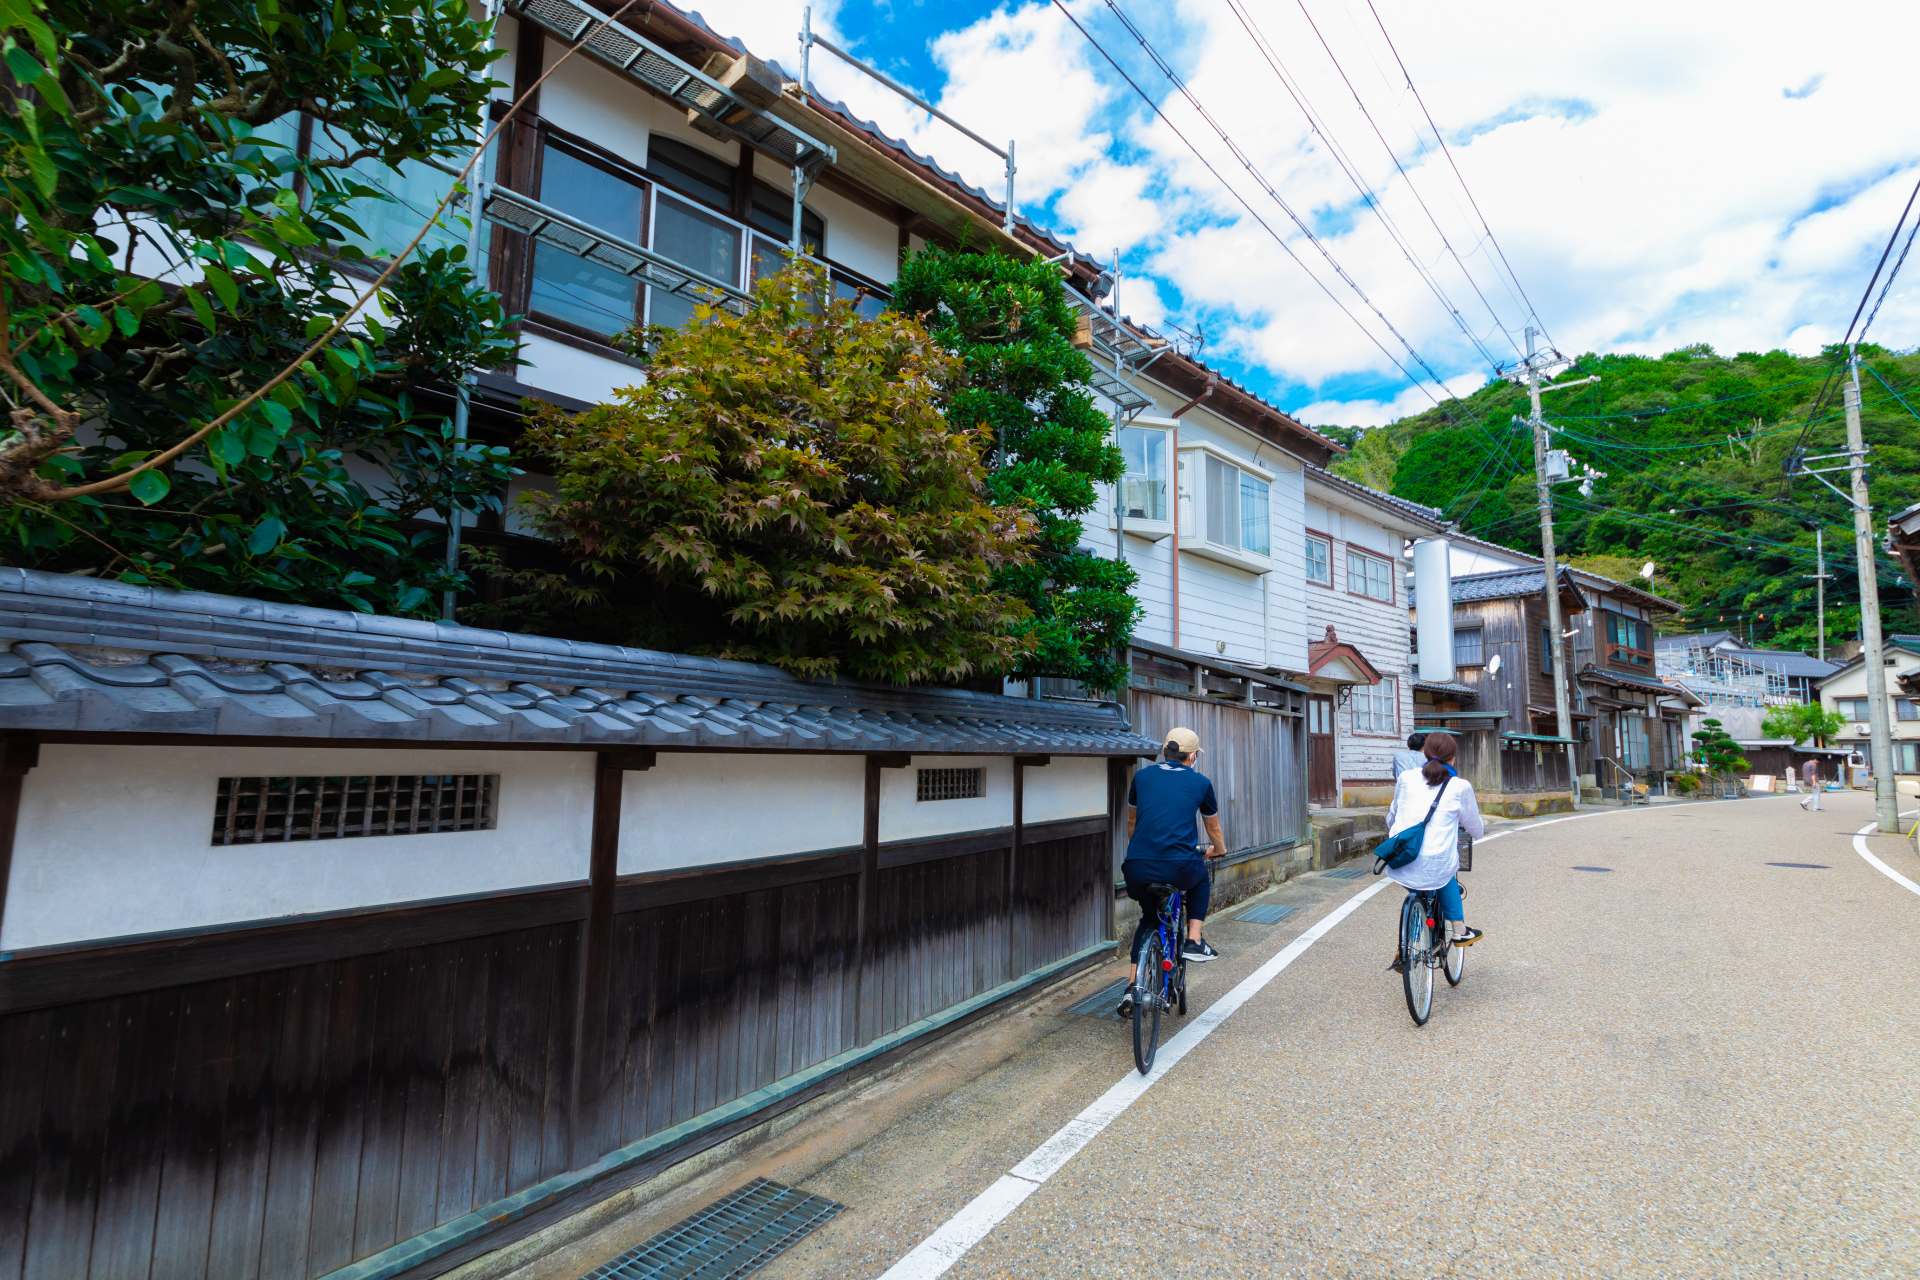 Cycle around the town of Ine. There are local Japanese sake breweries and boathouse cafes.